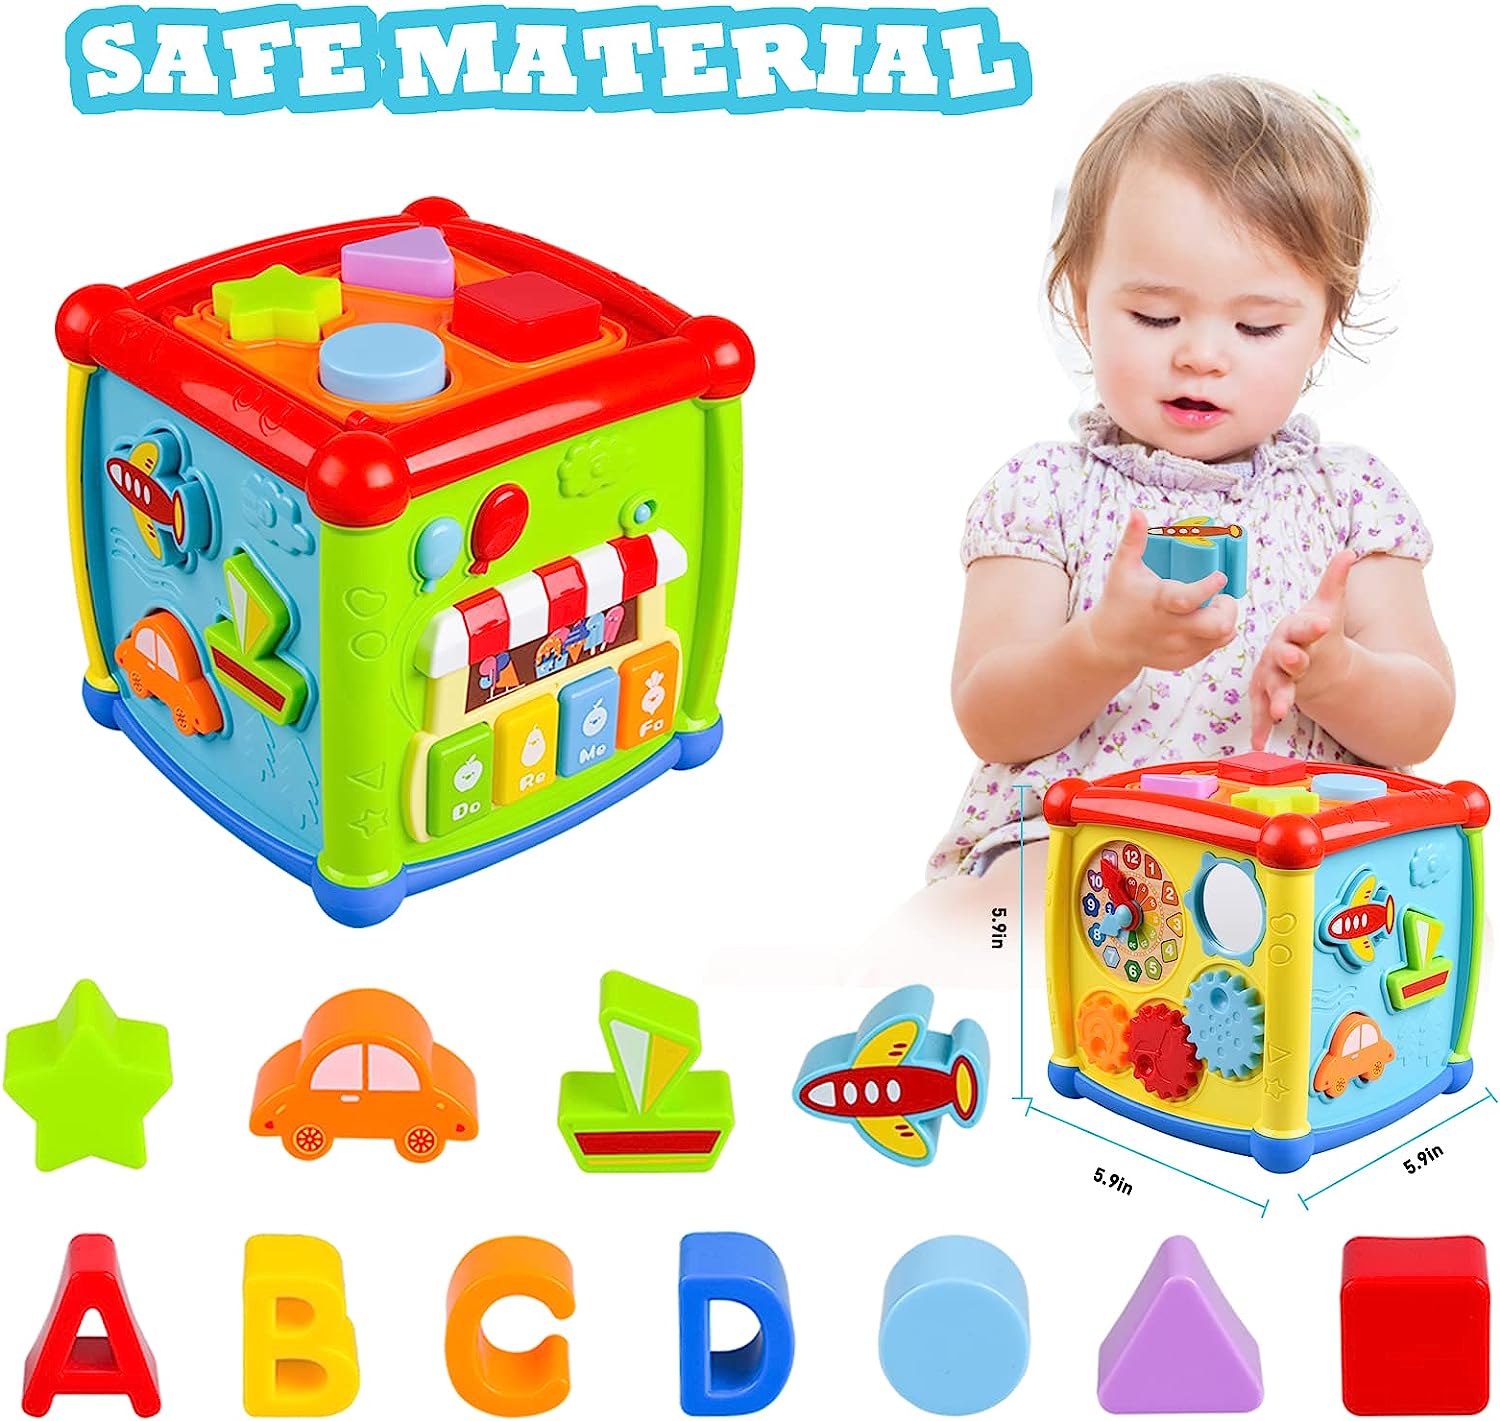 Activity Cube Baby Toddler Toys for 1 2 3 Year Old, 6 in 1 Educational Toy, Music Enlightenment, Letter Learning, Shape Sorting Game, One Year Old Birthday Gifts for Boys Girls